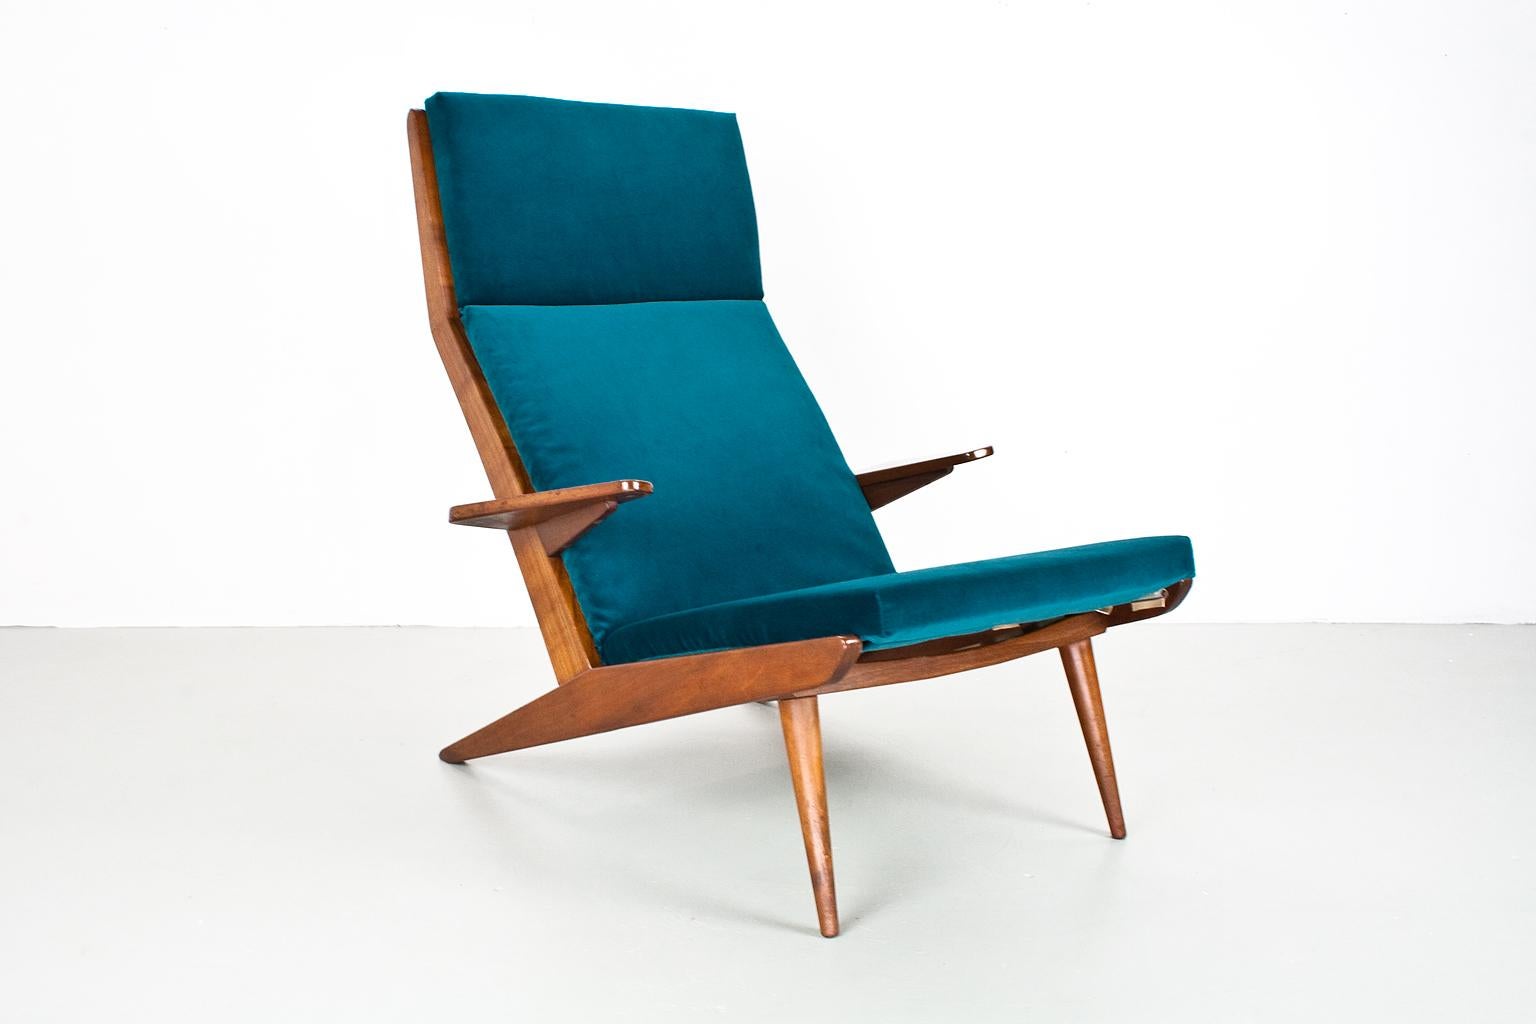 Elegant 1960s lounge chair in teak and re-upholstered in a great quality teal cotton velvet. Large flared armrests and strong, declining back legs.  Timeless mid century modern design which still looks contemporary in any home.

The transparant and